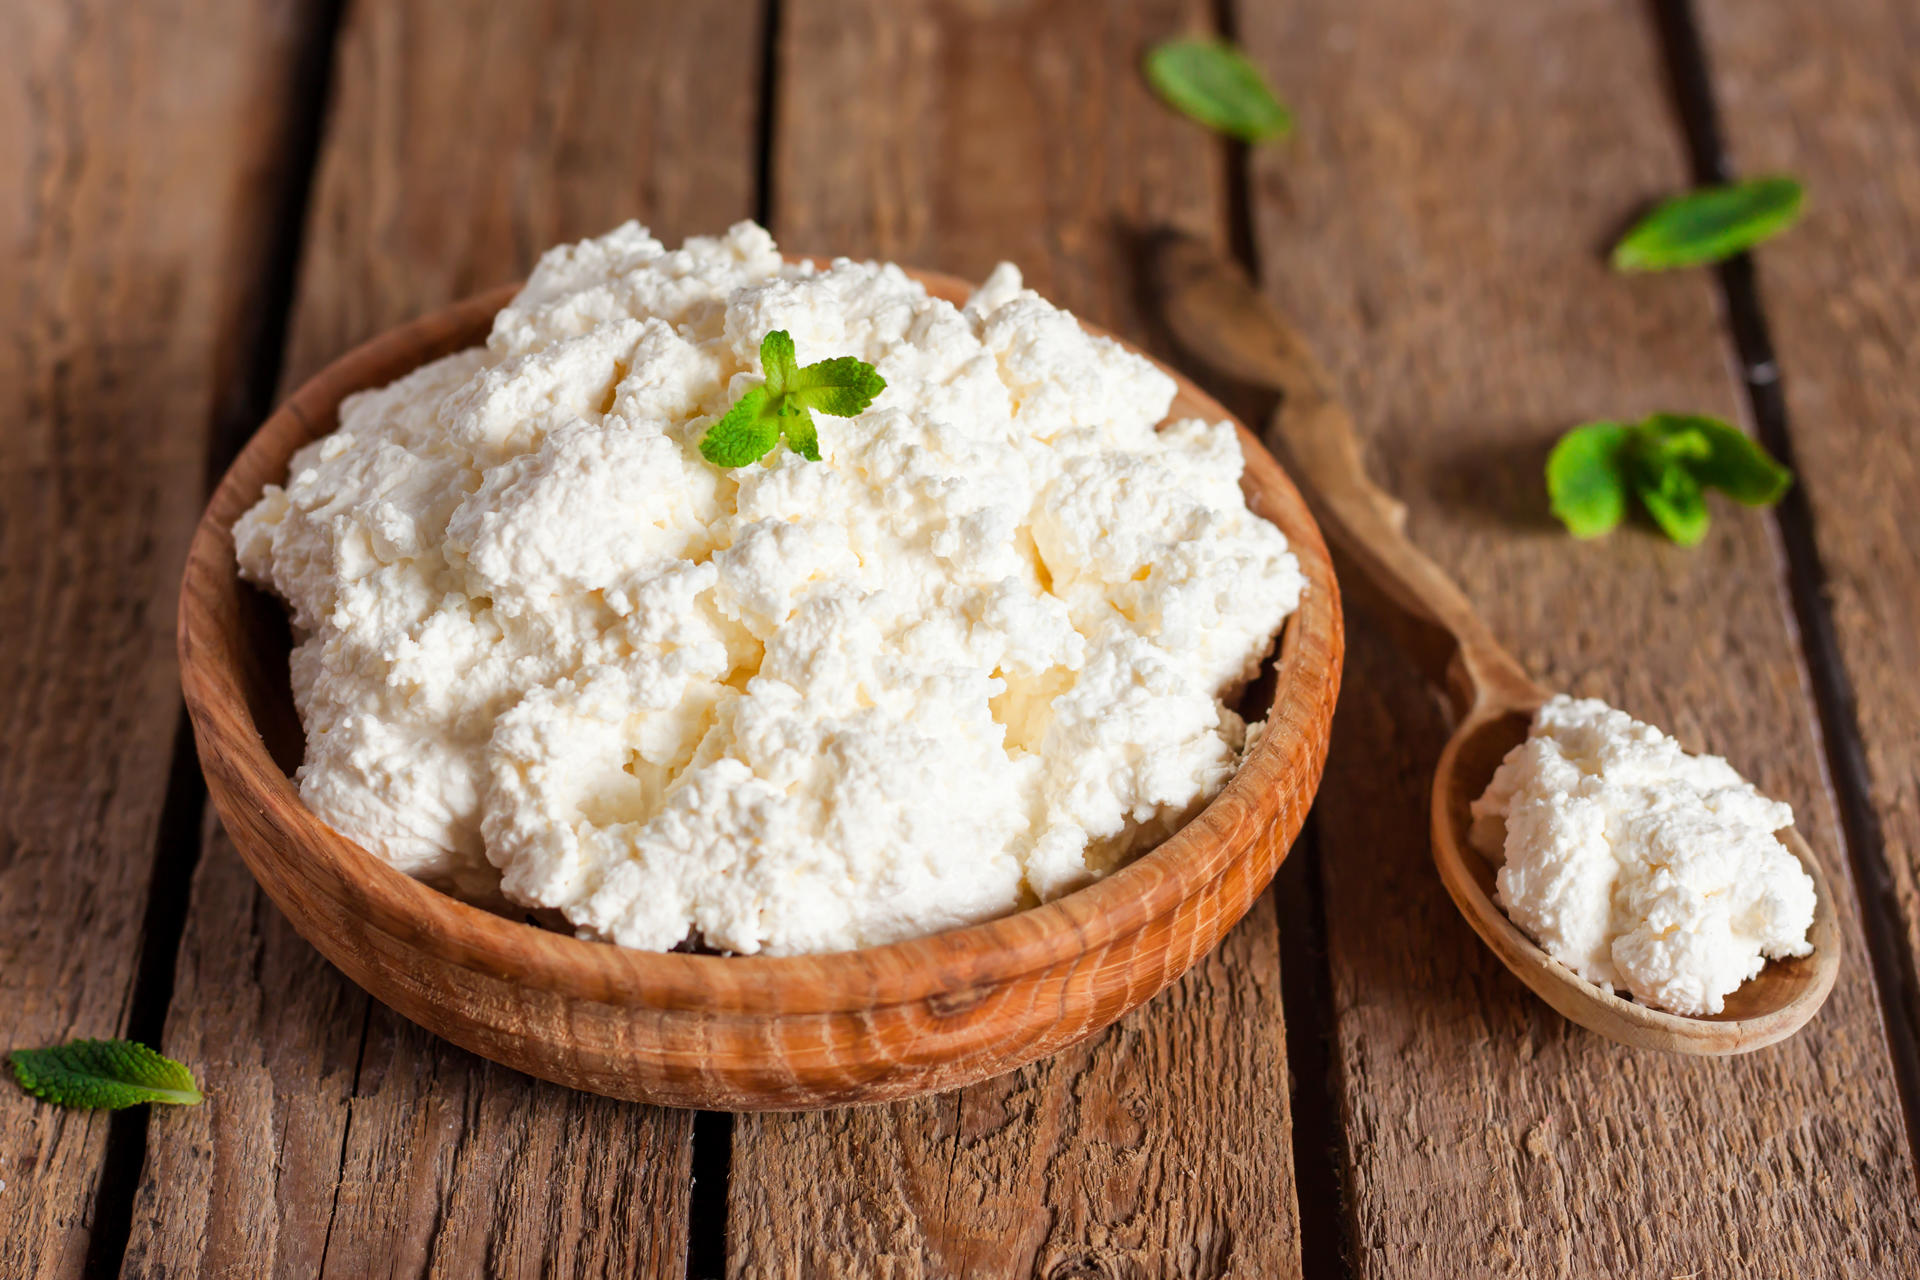 Organic Cottage Cheese: High Protein, Purity, and Nutritional Value